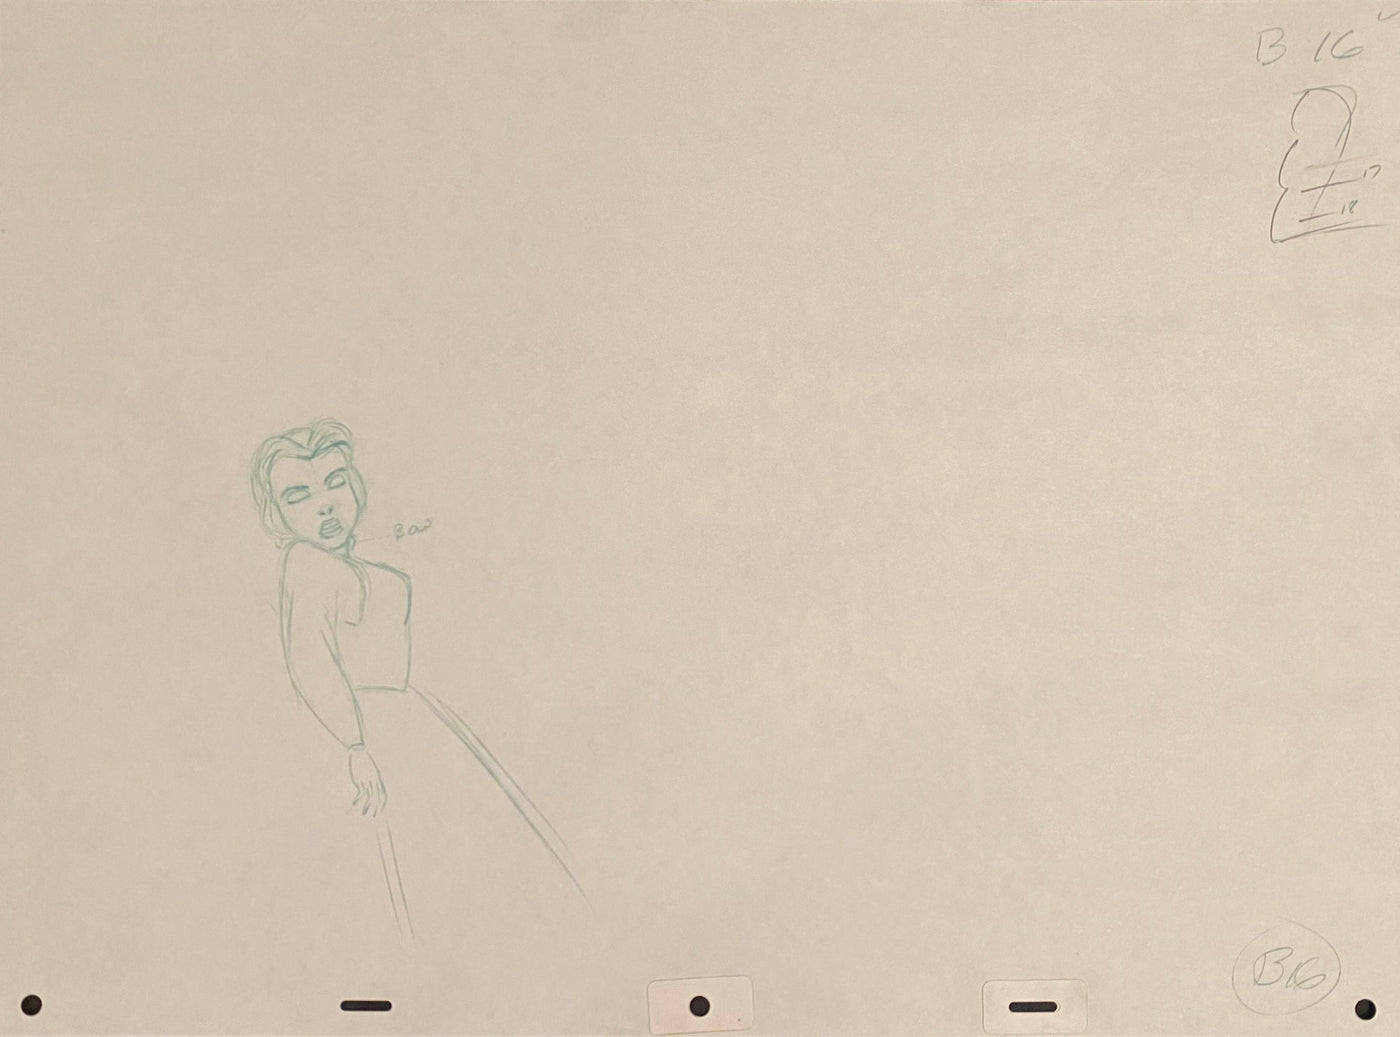 Original Walt Disney Production Drawing from Beauty and the Beast featuring Belle